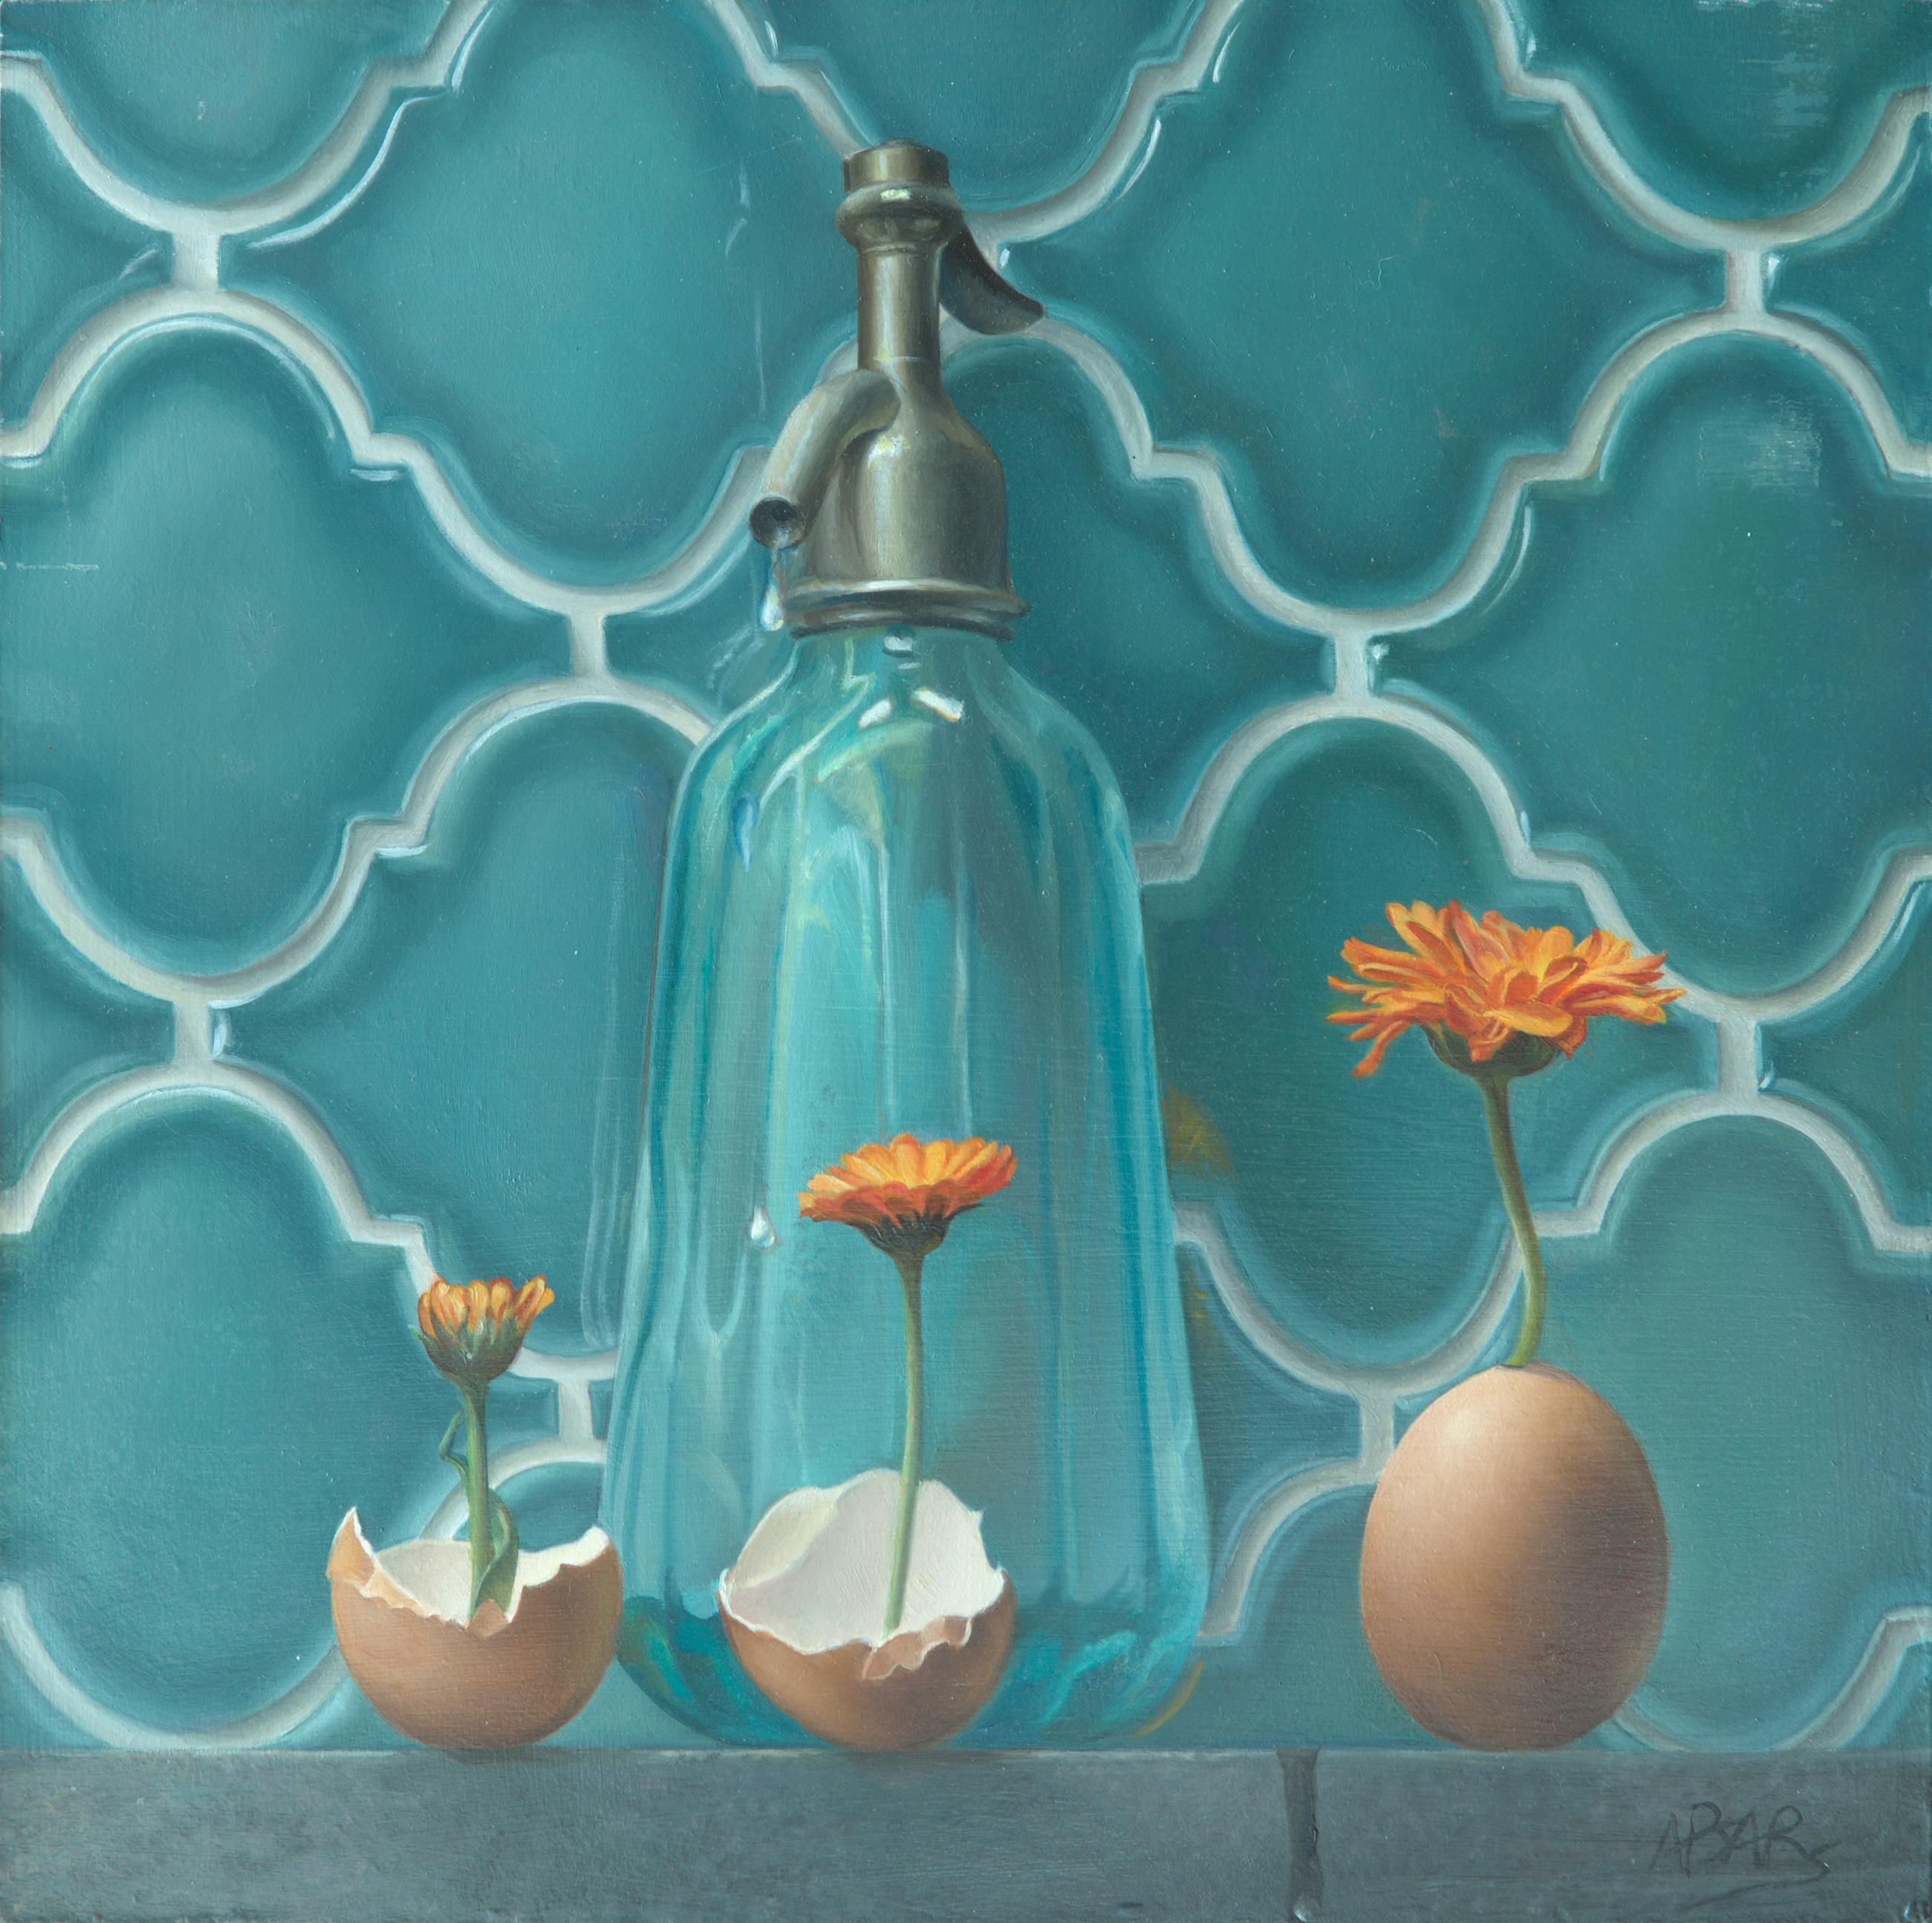 Andrée Bars Figurative Painting - “Life”, of Transparent Water Carafe, Flowers and Eggs,  Symbolism Oil Painting